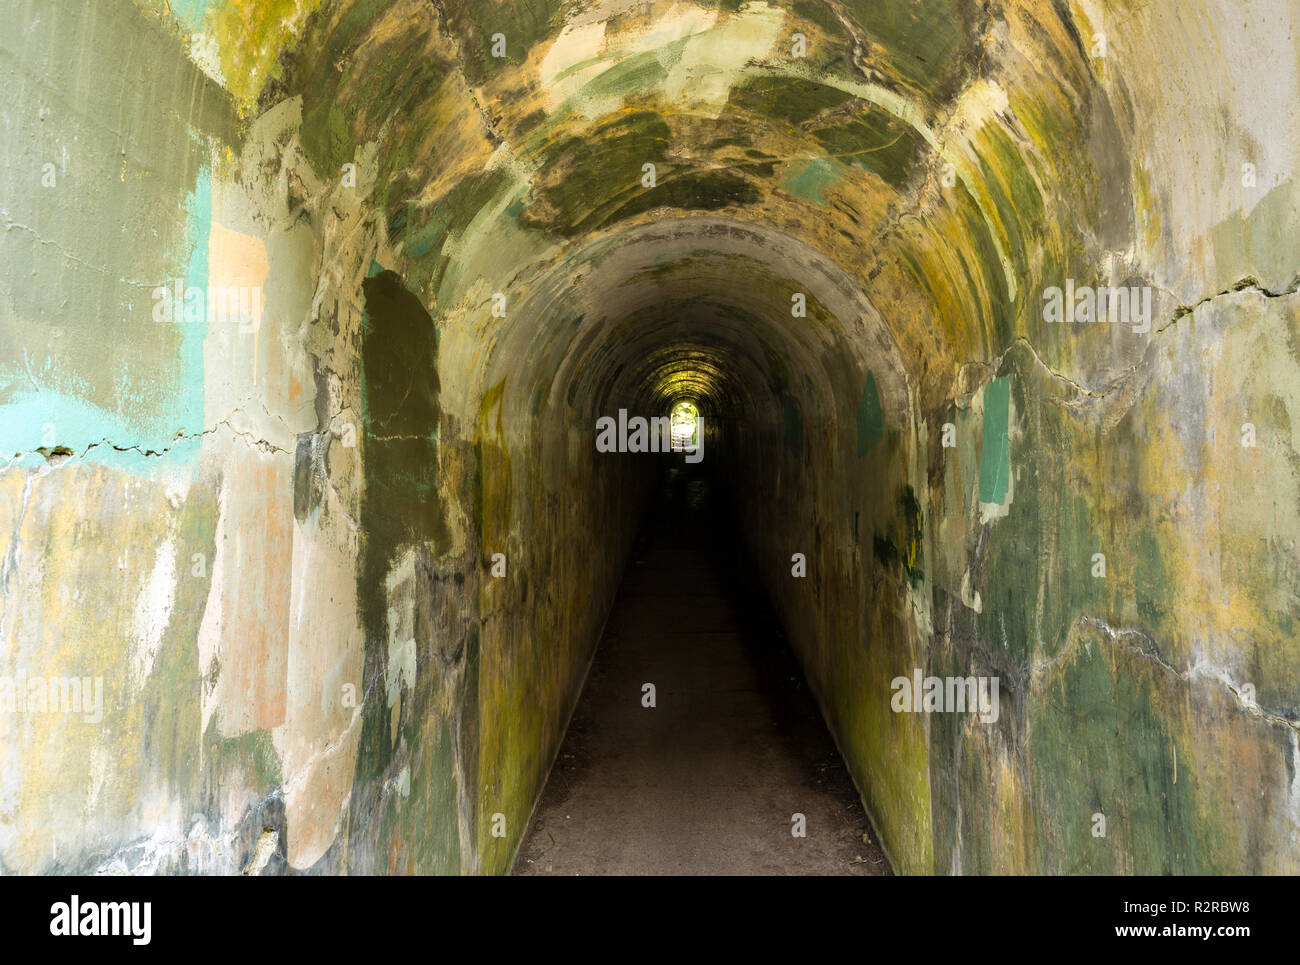 WA14666-00...WASHINGTON - Painted tunnel at Fort Warden State Park in Port Townsend. Stock Photo